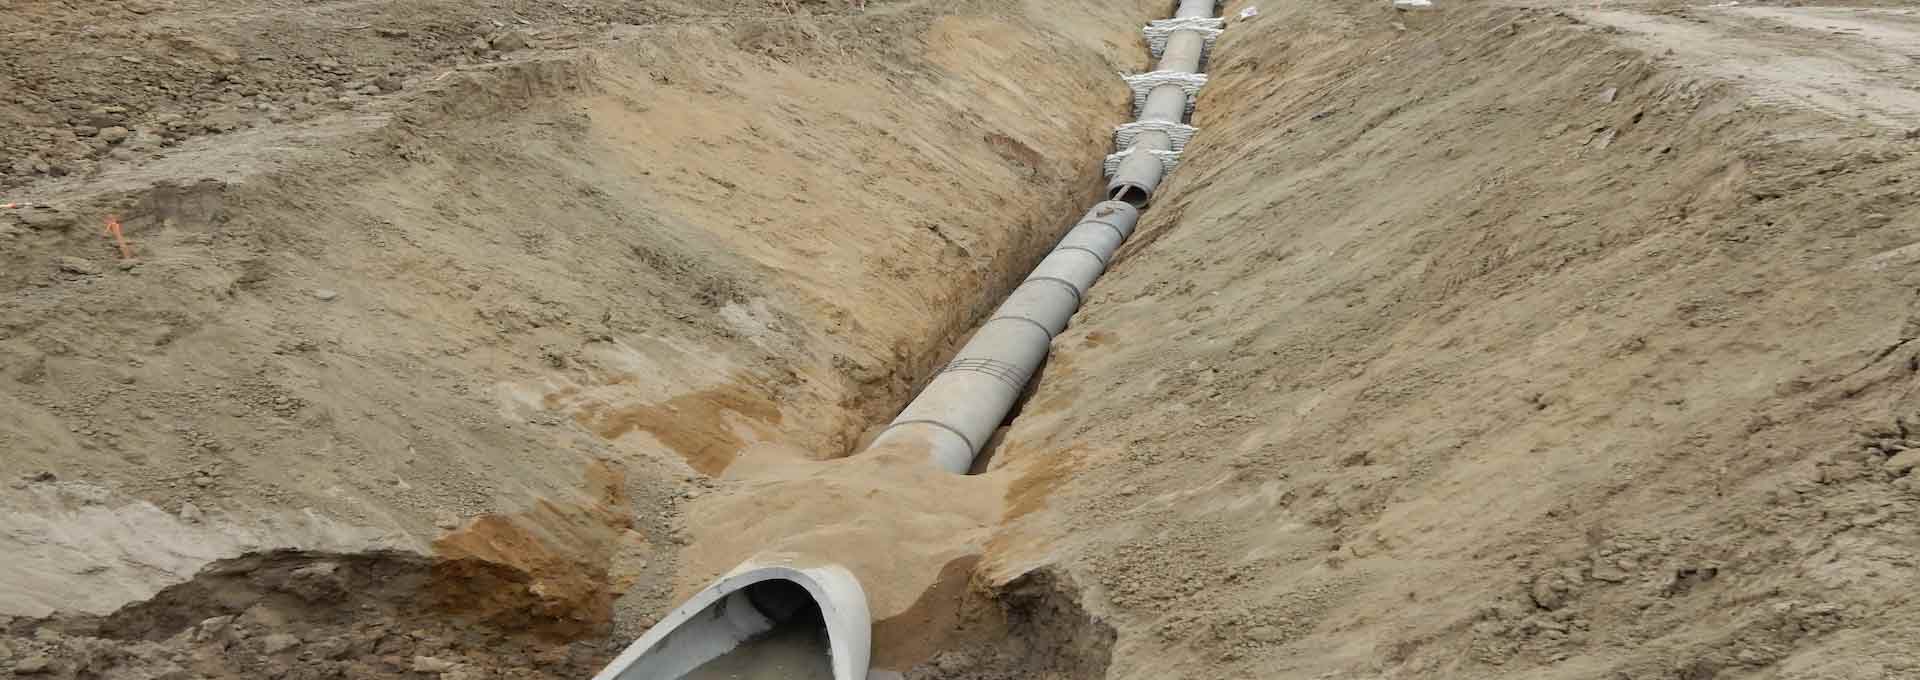 drainage systems by TPG image 7